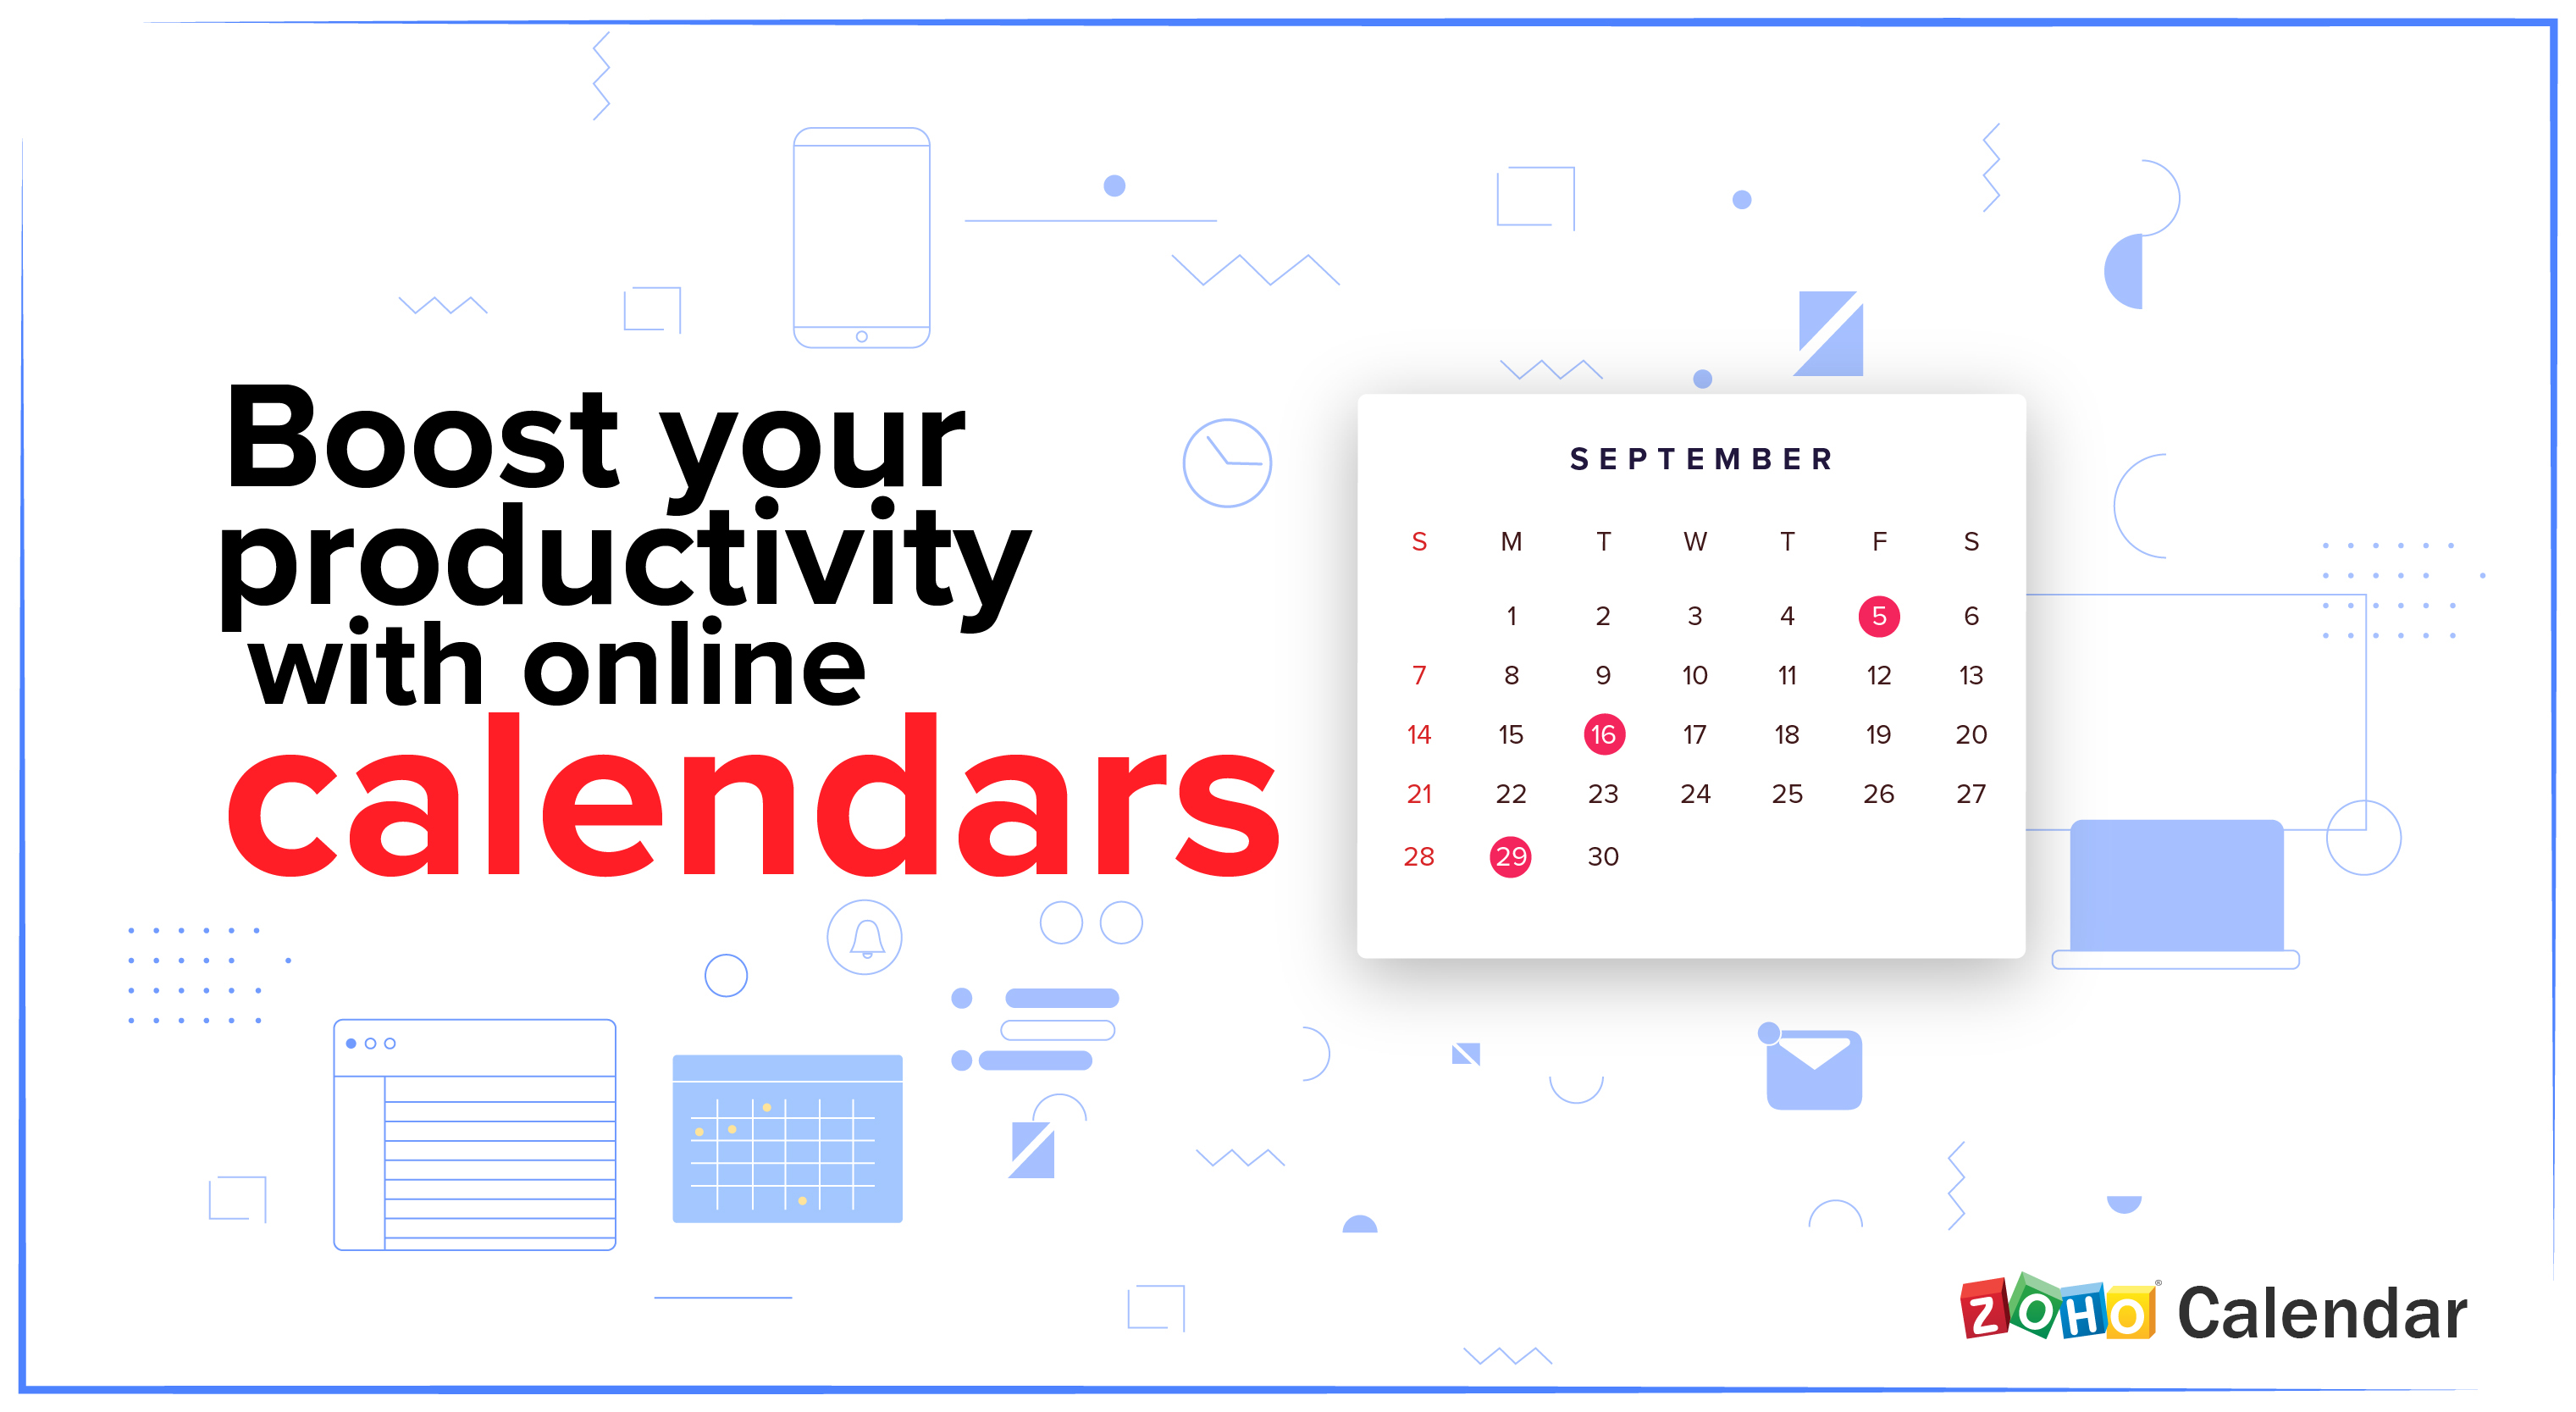 How to boost your productivity with online calendars?